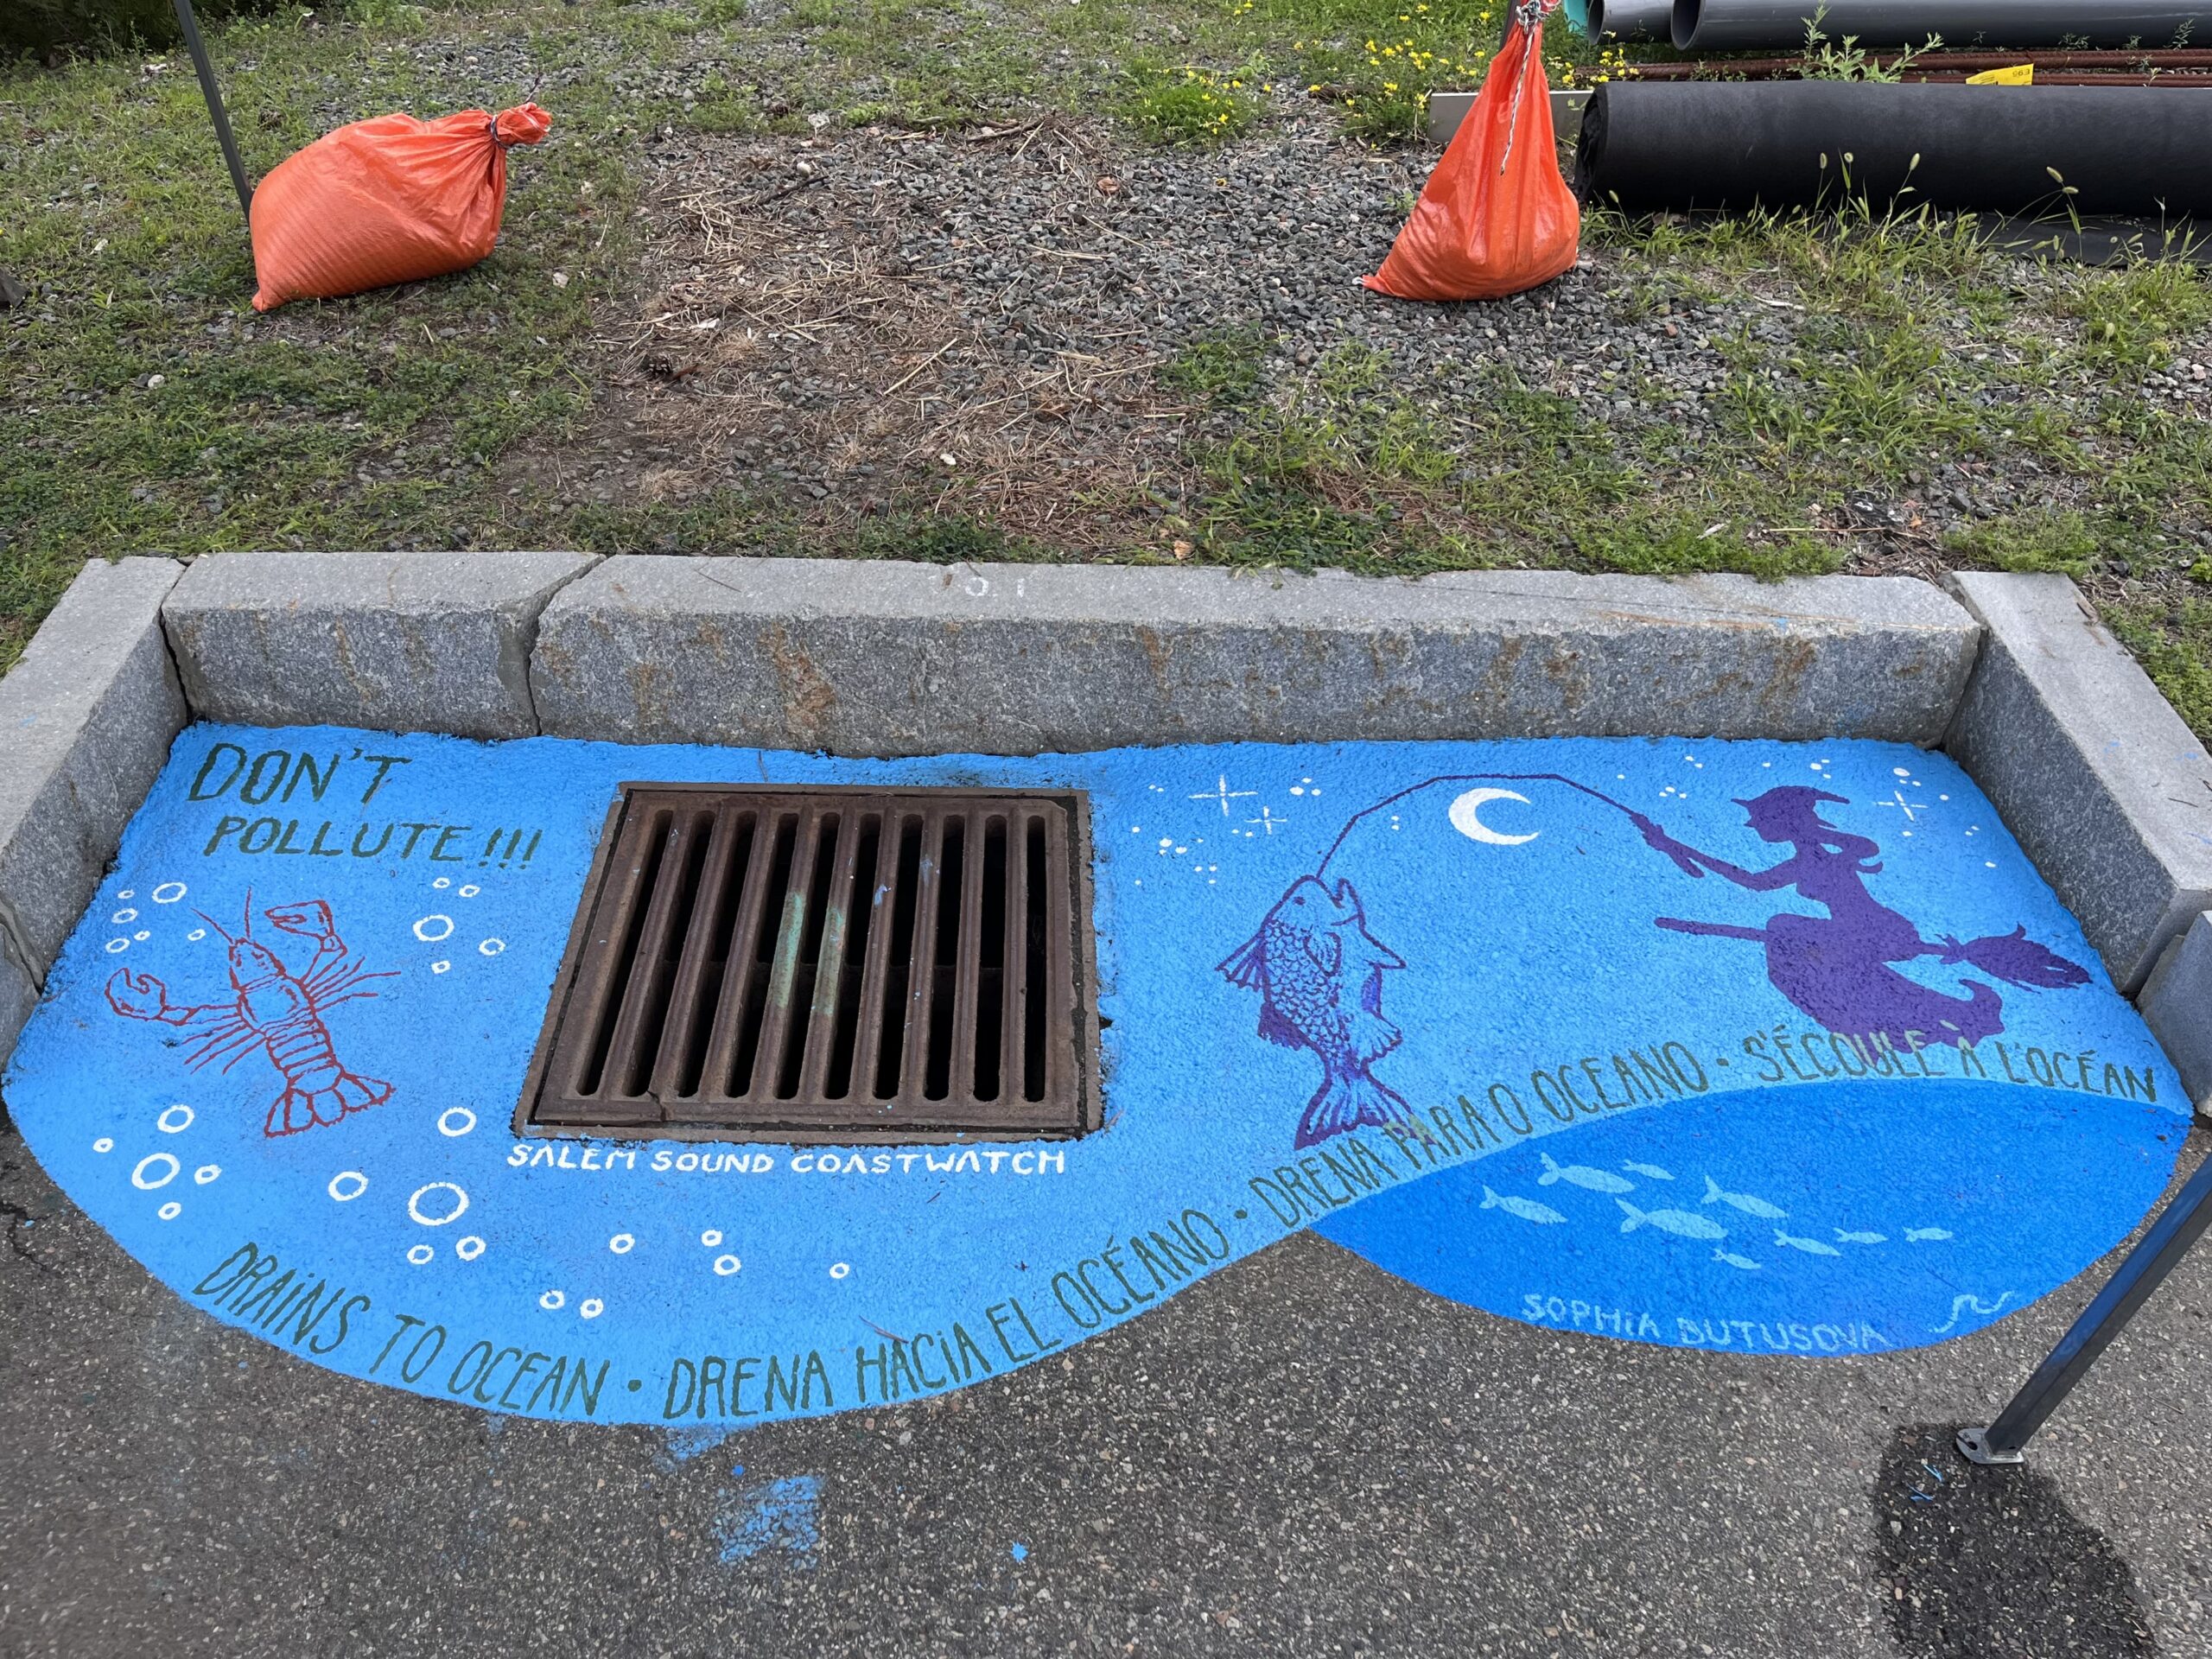 In this photo, you see the storm drain mural, almost complete, with a hand-painted, blue ocean background, a red lobster, white bubbles, and a dark blue City of Salem, MA witch fishing by a white crescent moon and stars from their broom, with a big fish on the fishing pole line. Under the grate in white lettering it says: "Salem Sound Coastwatch." It says in green lettering in the top left: "Don't pollute!!!" and at the bottom of the mural: "Drains to ocean . Drena hacia el oceano . Drena para o oceano . S'ecule a l'ocean." A used, blue paint brush is next to the brown grate.